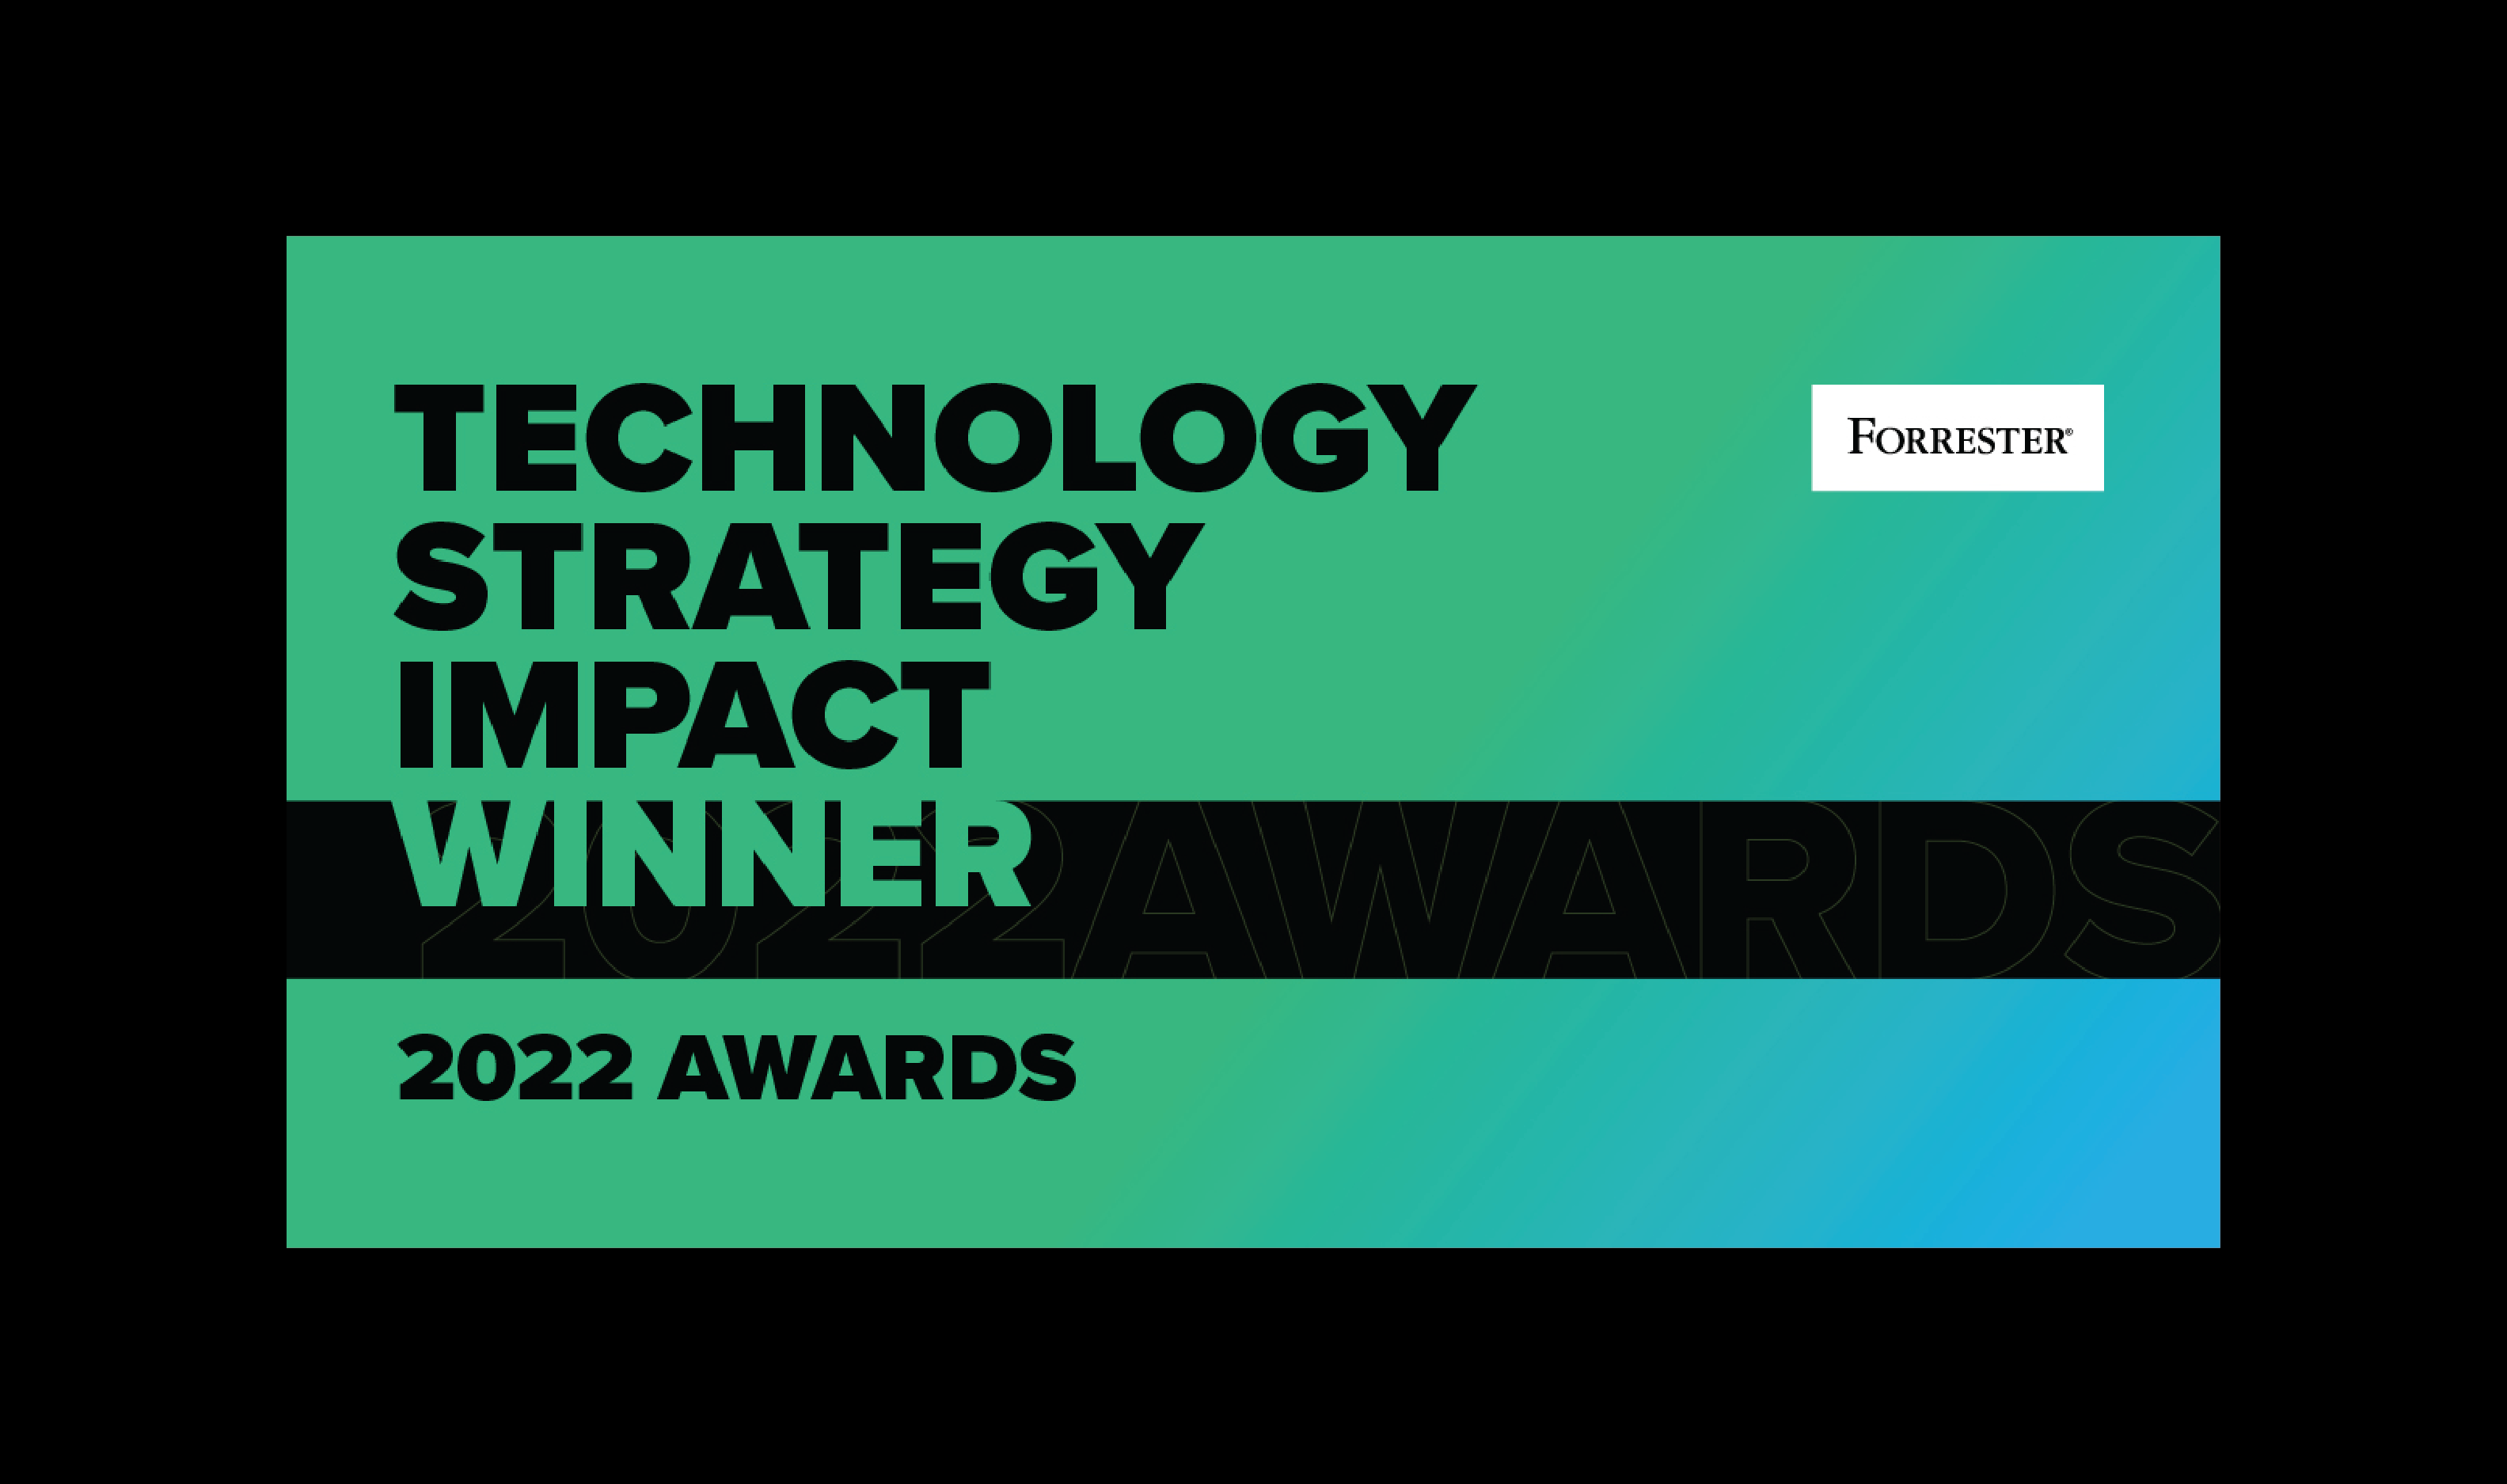 Forrester's 2022 Technology Strategy Impact Winner green and black logo on a black background